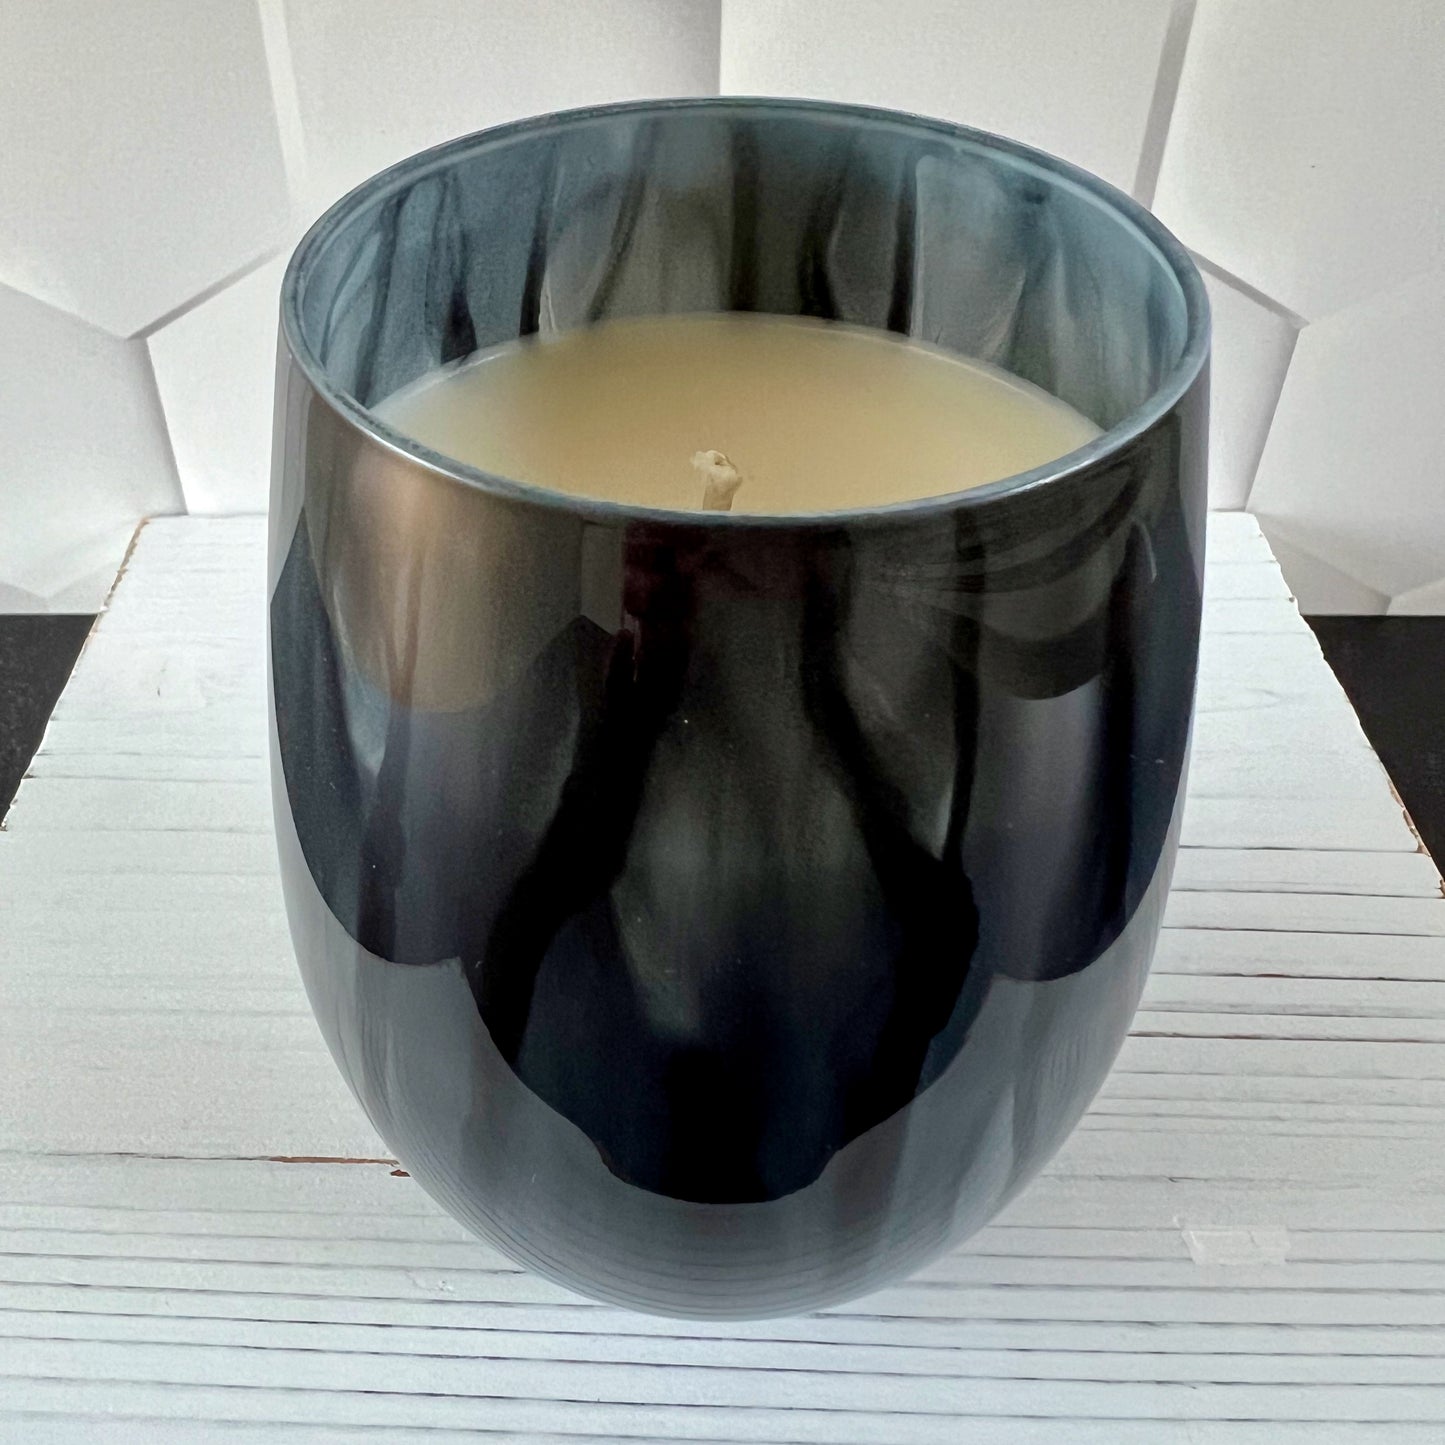 Moody Rose Black Candle - Limited Release!